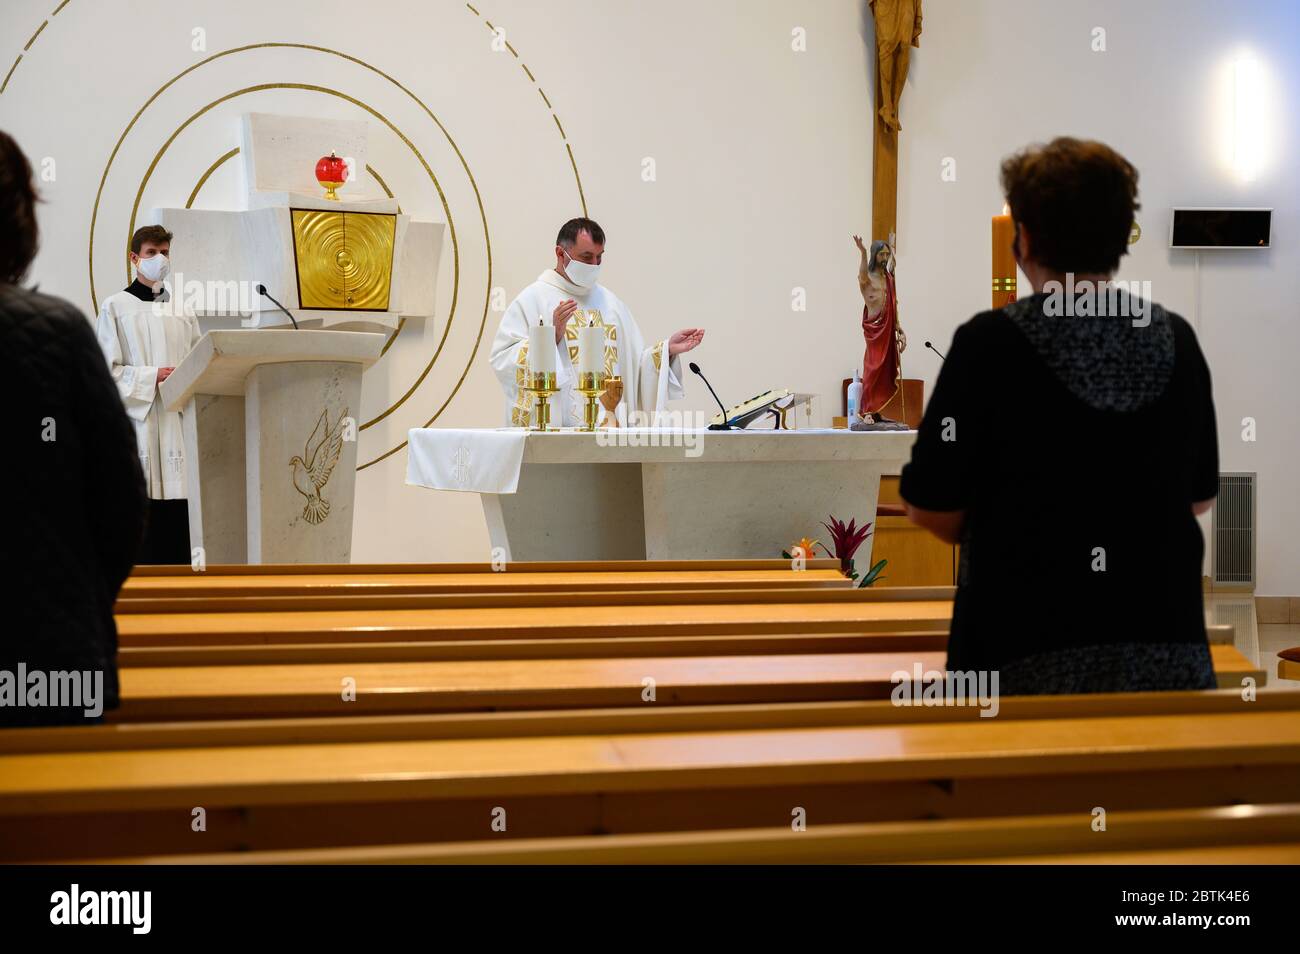 Bratislava, Slovakia. 2020/5/11. Holy mass being celebrated during the COVID-19 pandemic. The measures include wearing face masks and distancing. Stock Photo